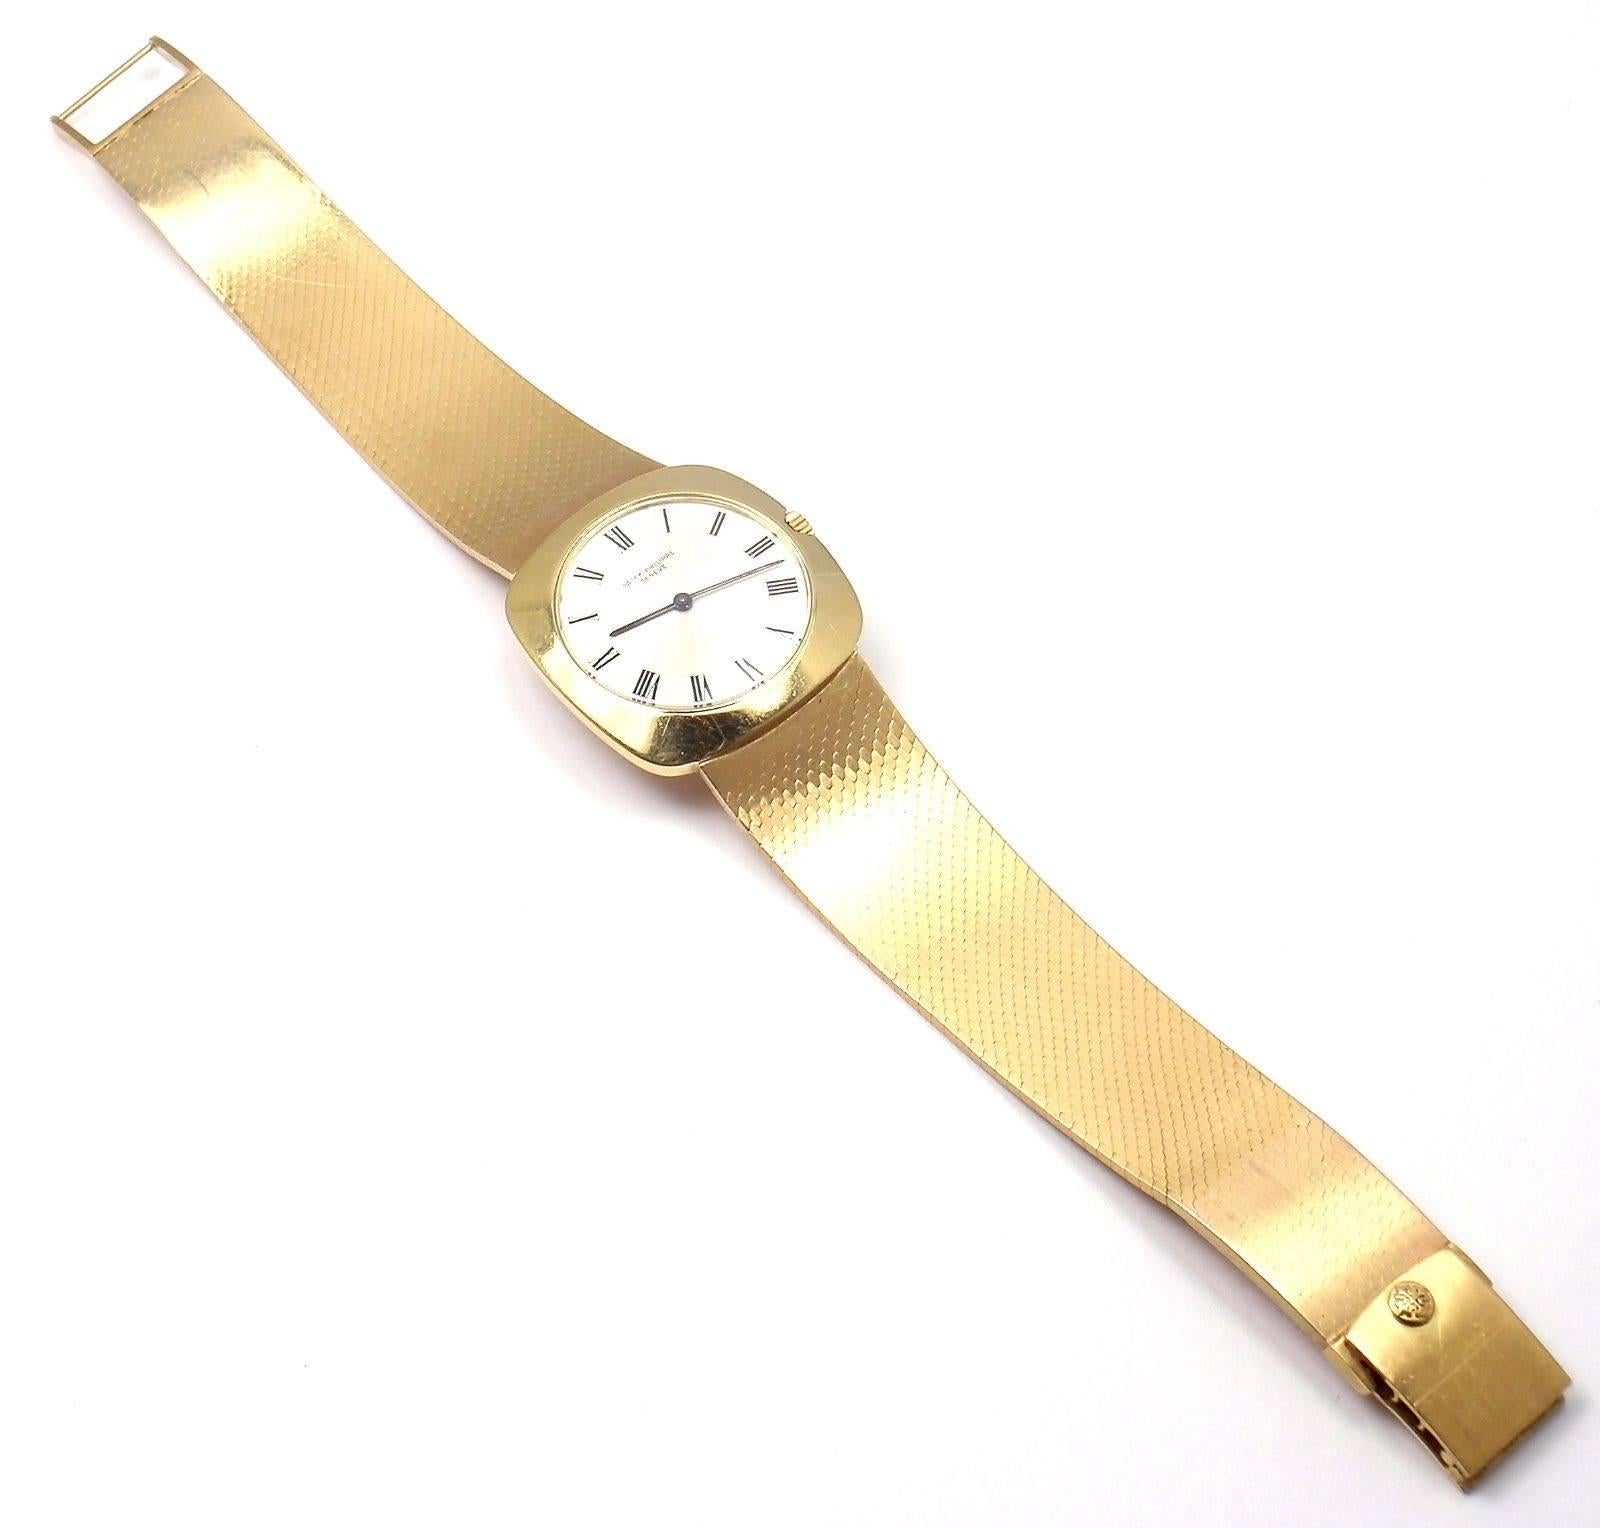 Patek Philippe 18k yellow gold manual wind wristwatch with white color dial. Ref. 3543. 
This watch has a solid 18k yellow gold case, and bracelet and it is in mint condition. 

Details: 
Movement: Manual Winding
Case Size: 31mm x 31mm
Weight: